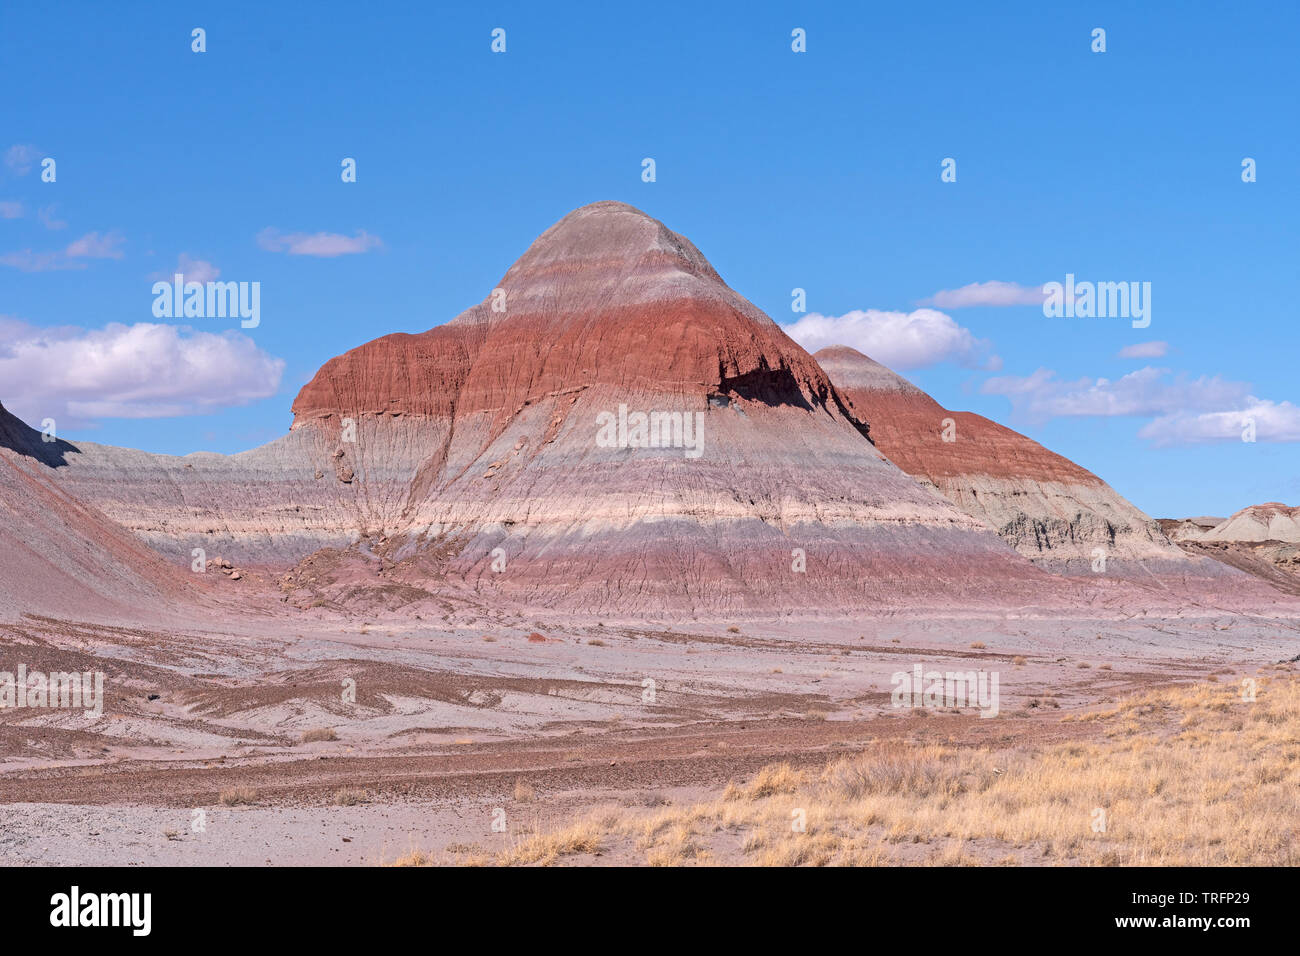 The Tepee Sedimentary Buttes in the Painted Desert in Petrified Forest National Park in Arizona Stock Photo